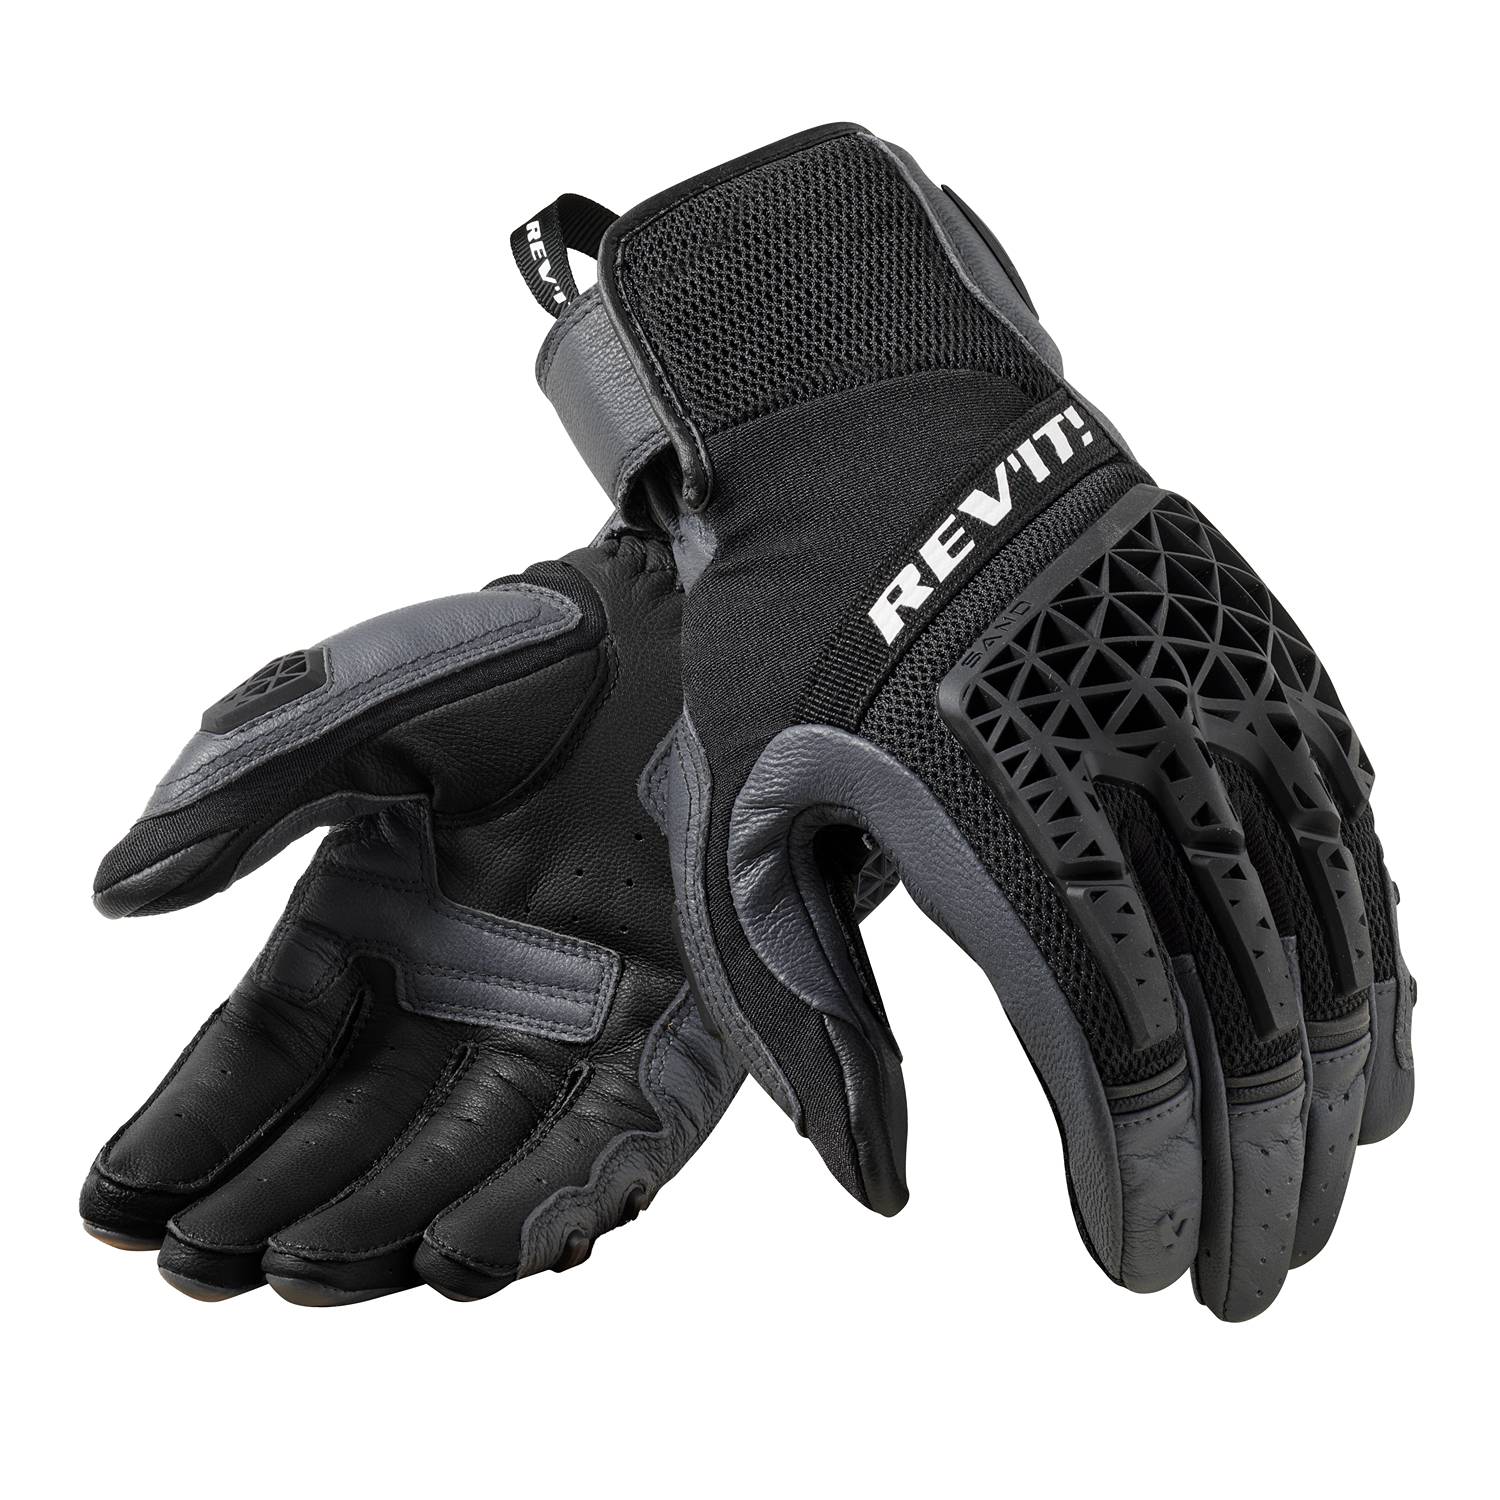 Image of REV'IT! Sand 4 Gloves Gray Black Size S ID 8700001375016